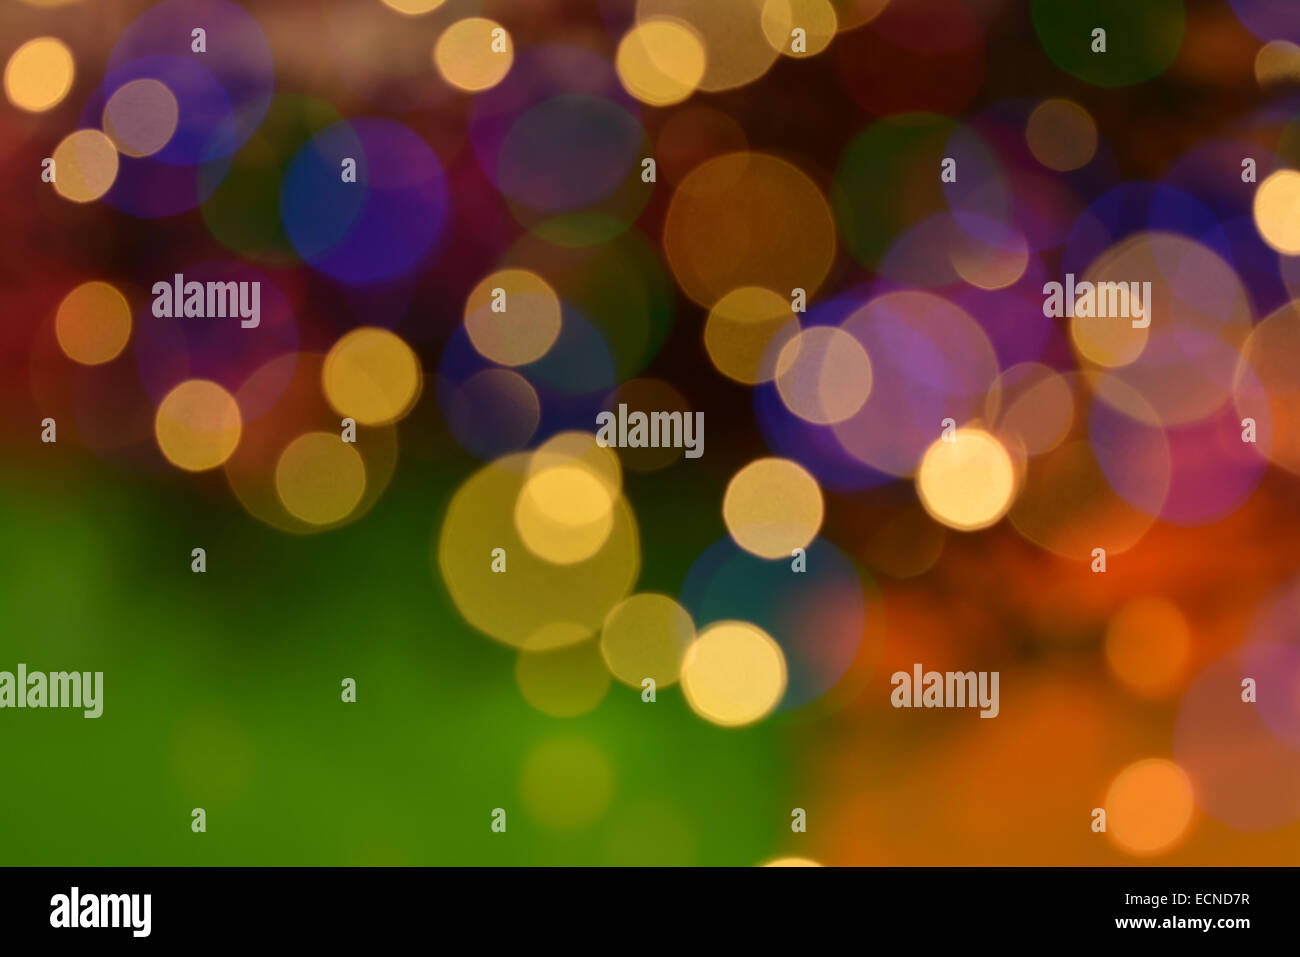 Blurred 'New Year' Christmas tree lights background in warm colours of gold green purple and orange Stock Photo